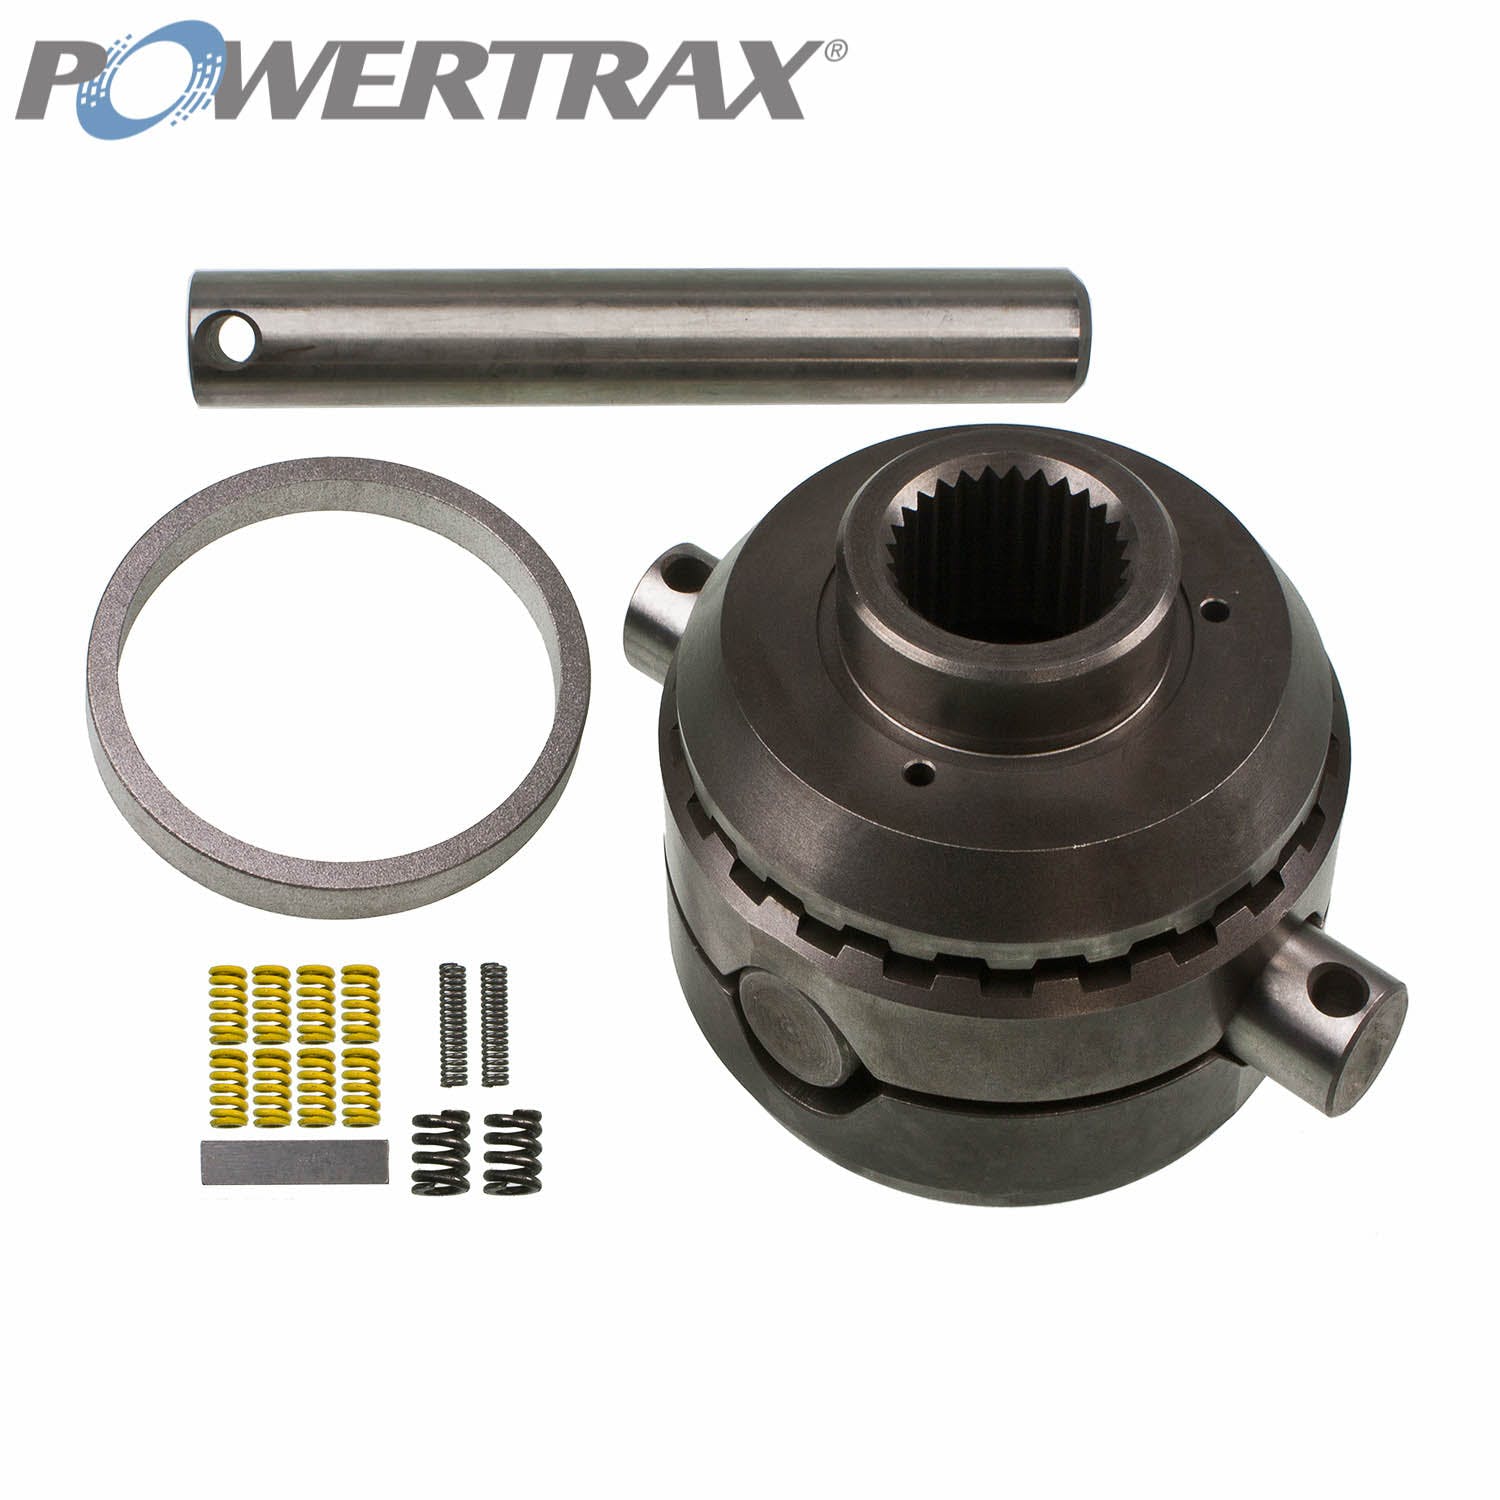 PowerTrax 9206802800 No-Slip Traction System